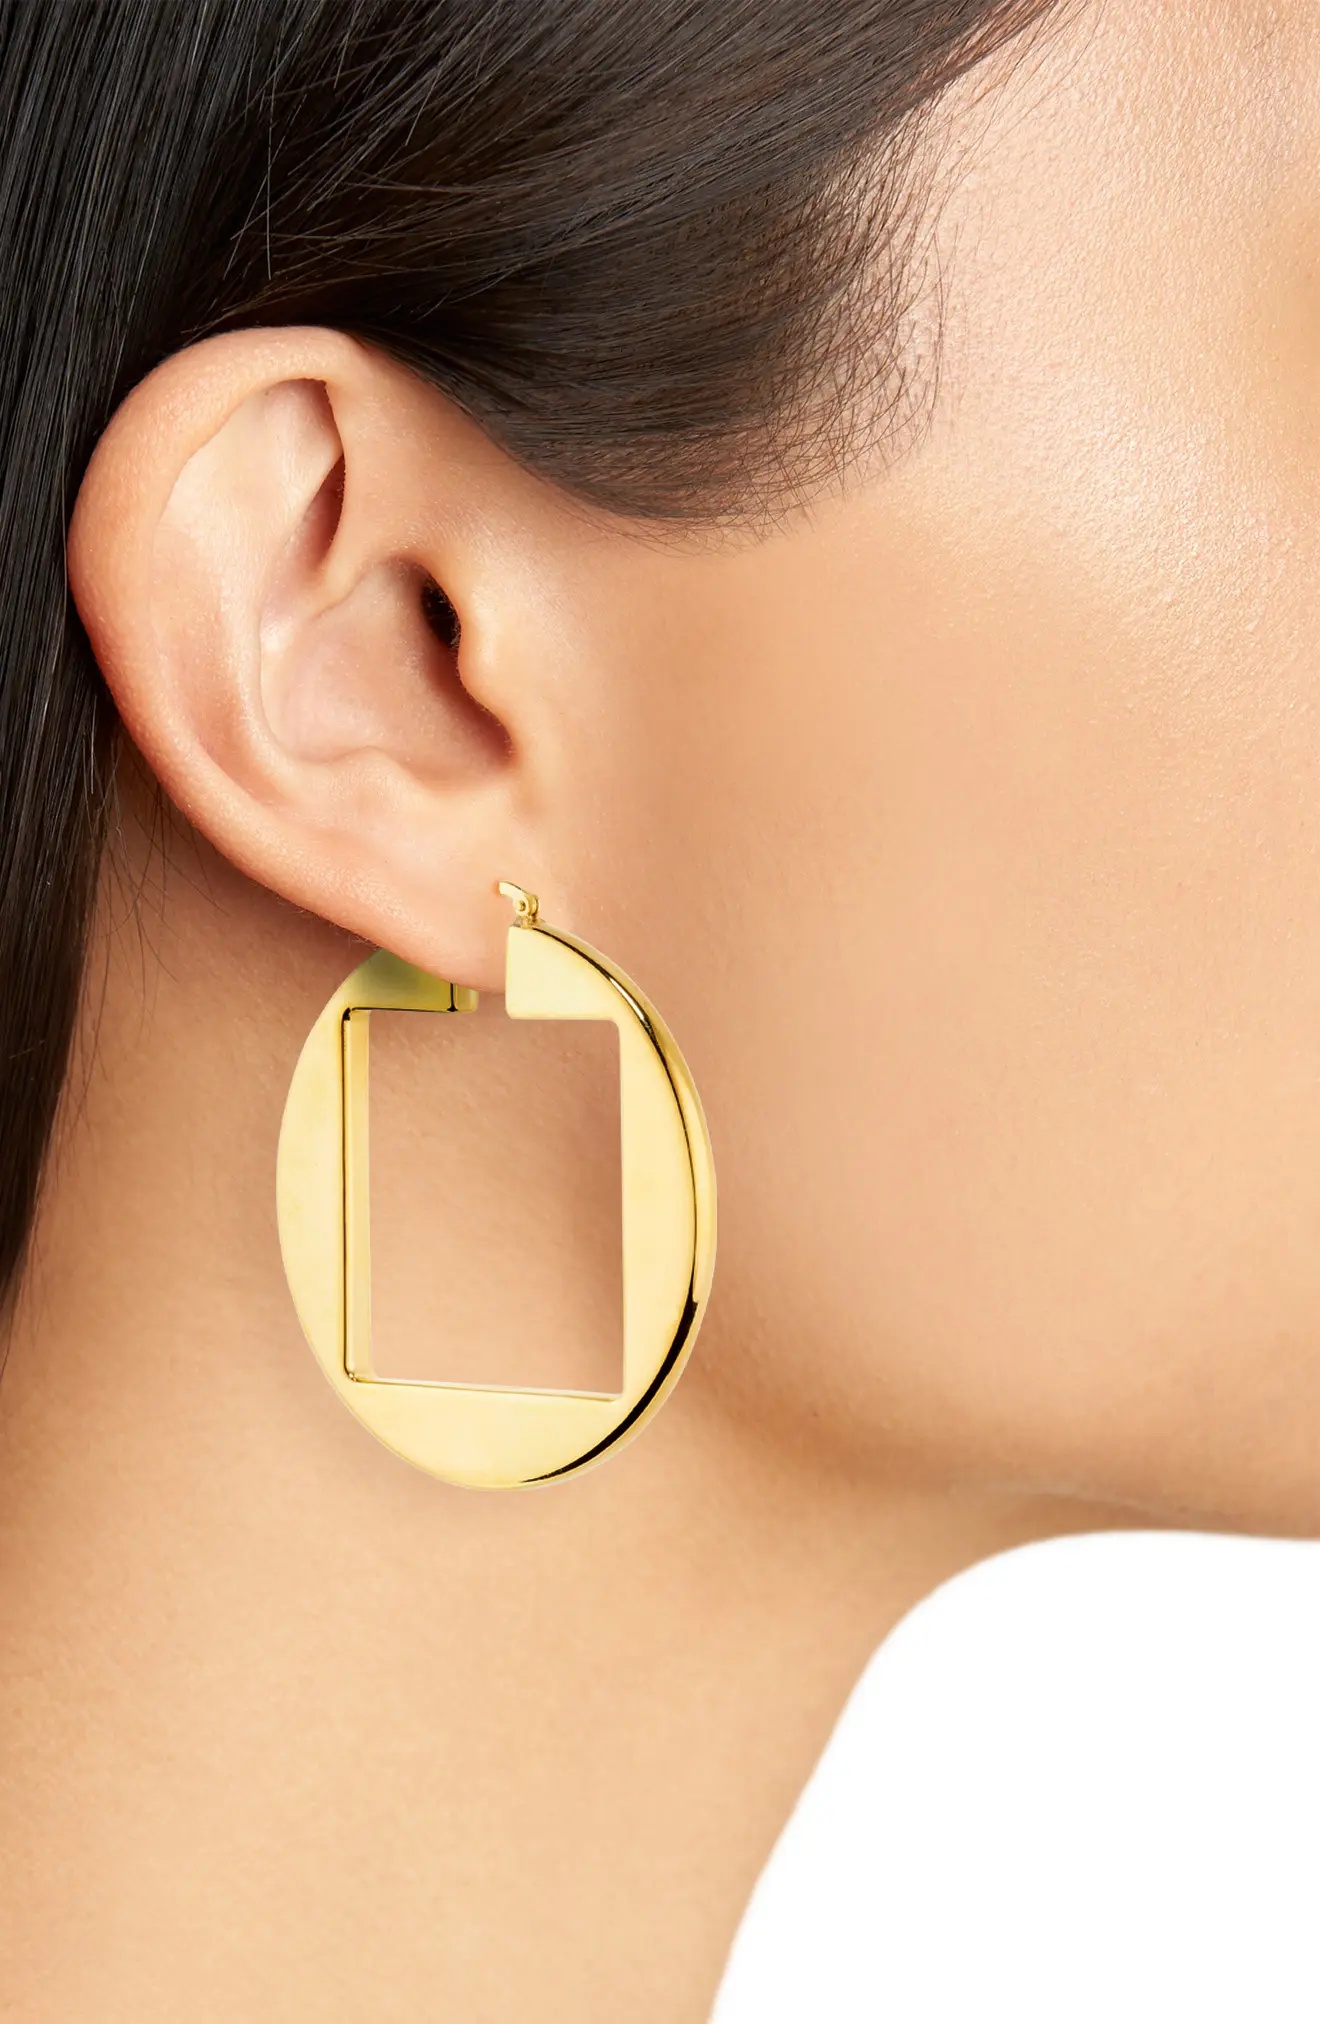 Les Creoles Rond Carré Misamatched Earrings - 2